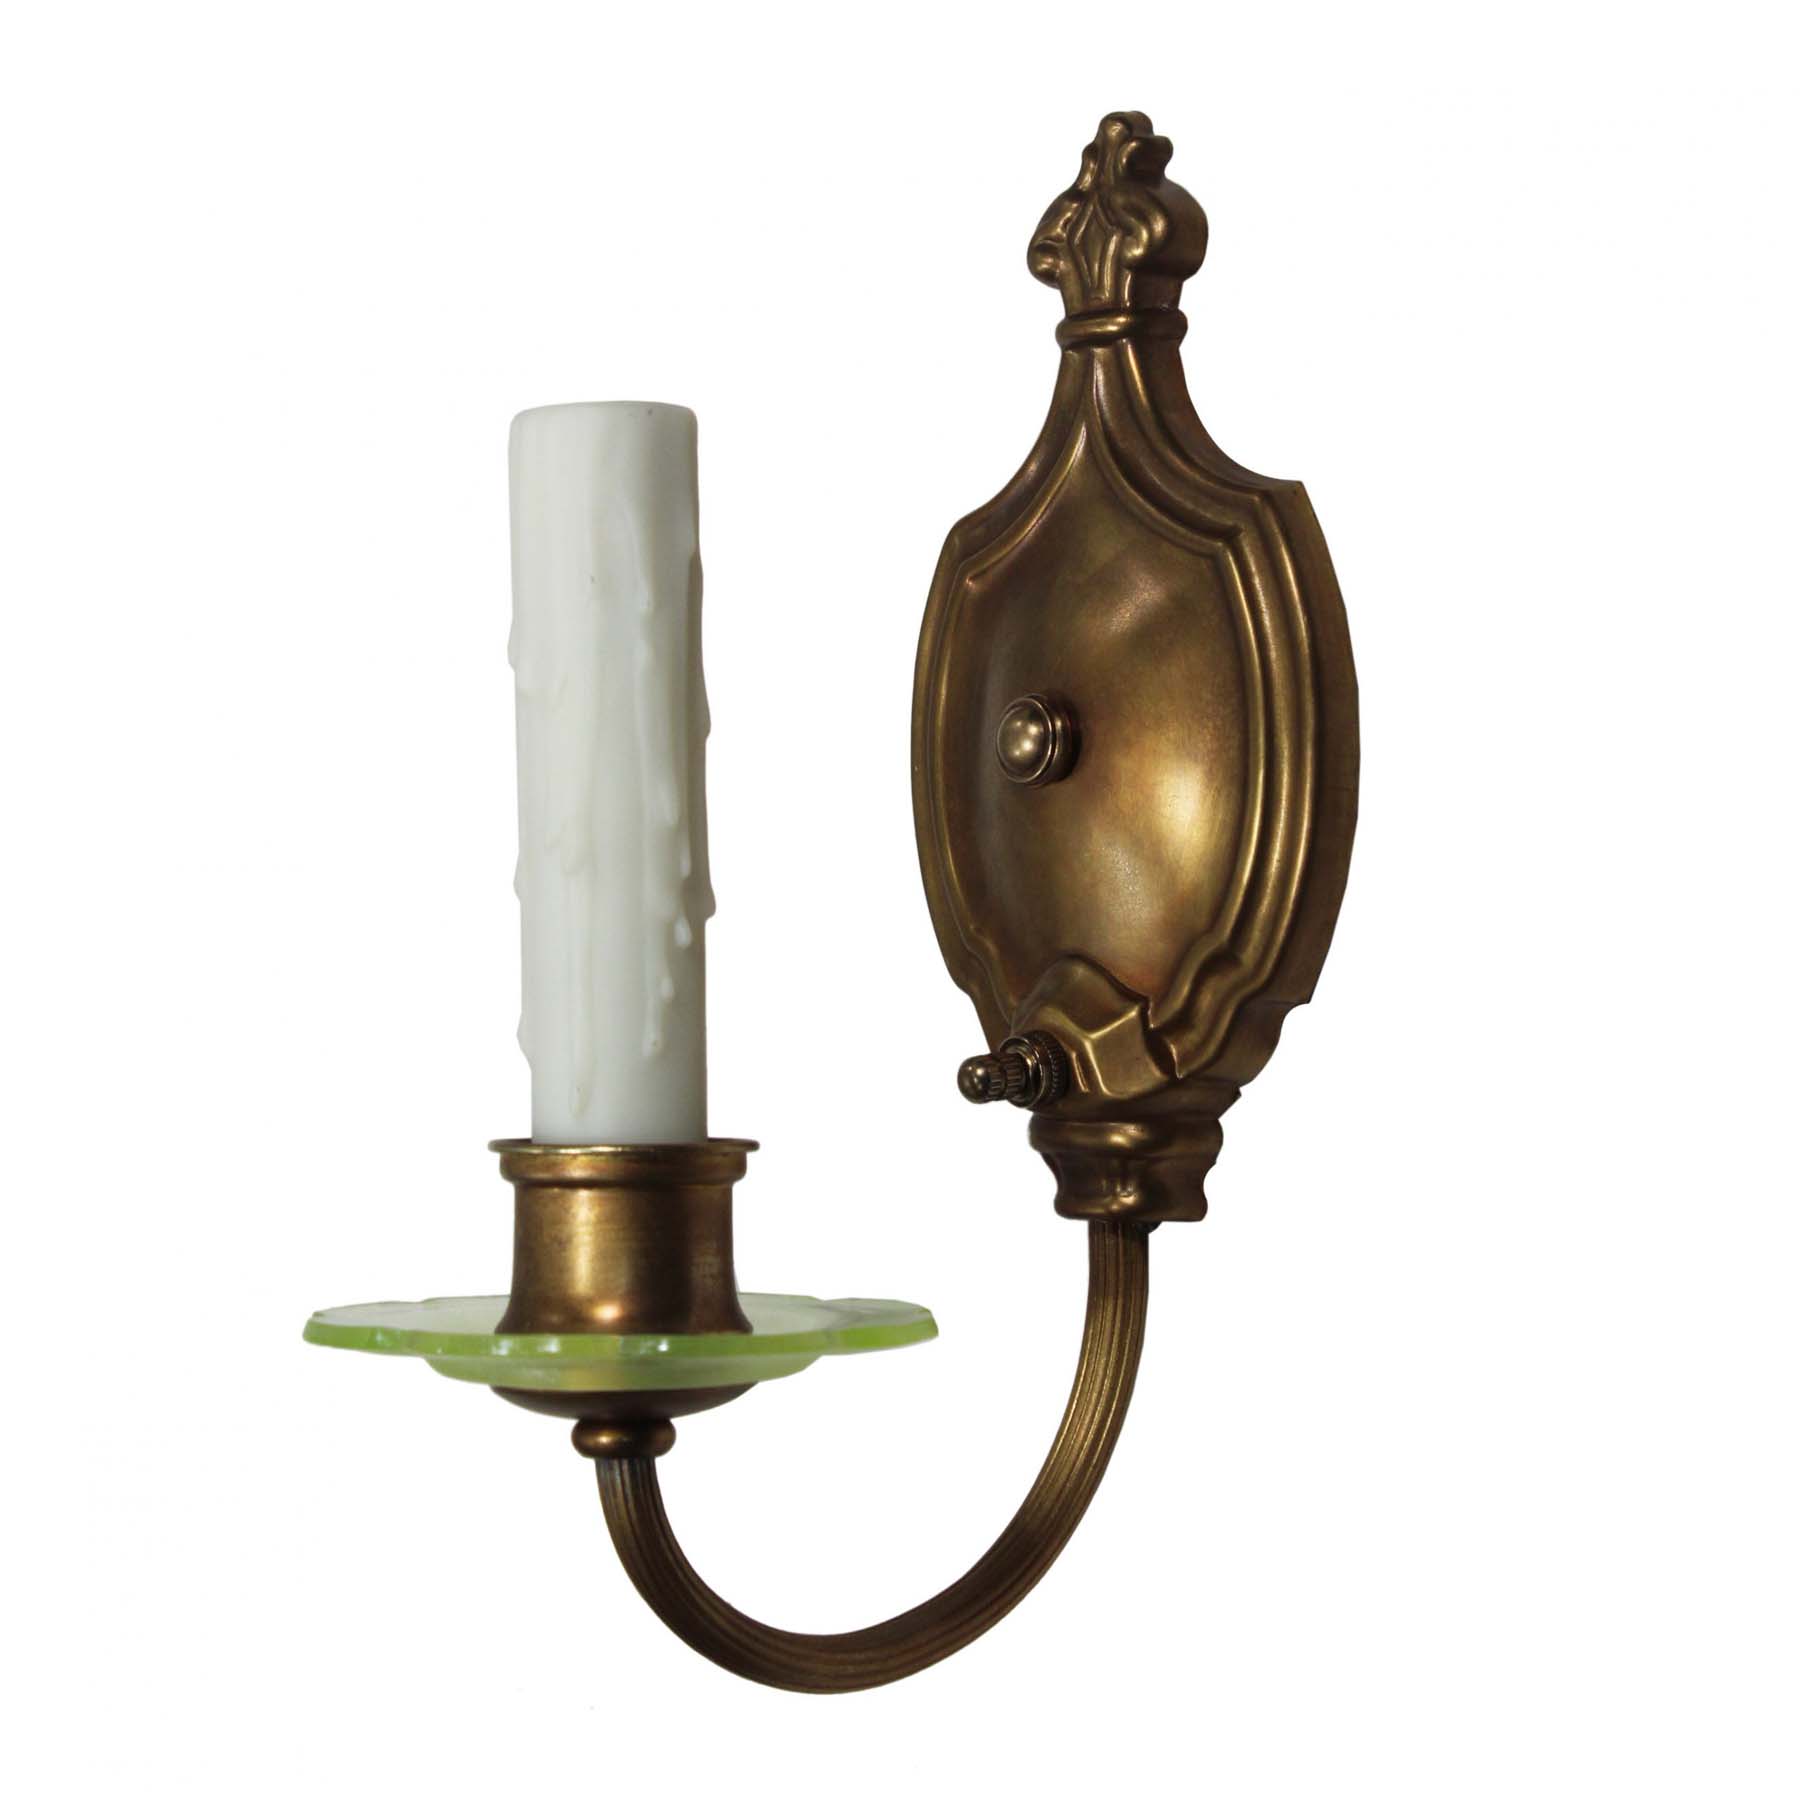 Pair of Antique Brass Sconces with Vaseline Glass-72140